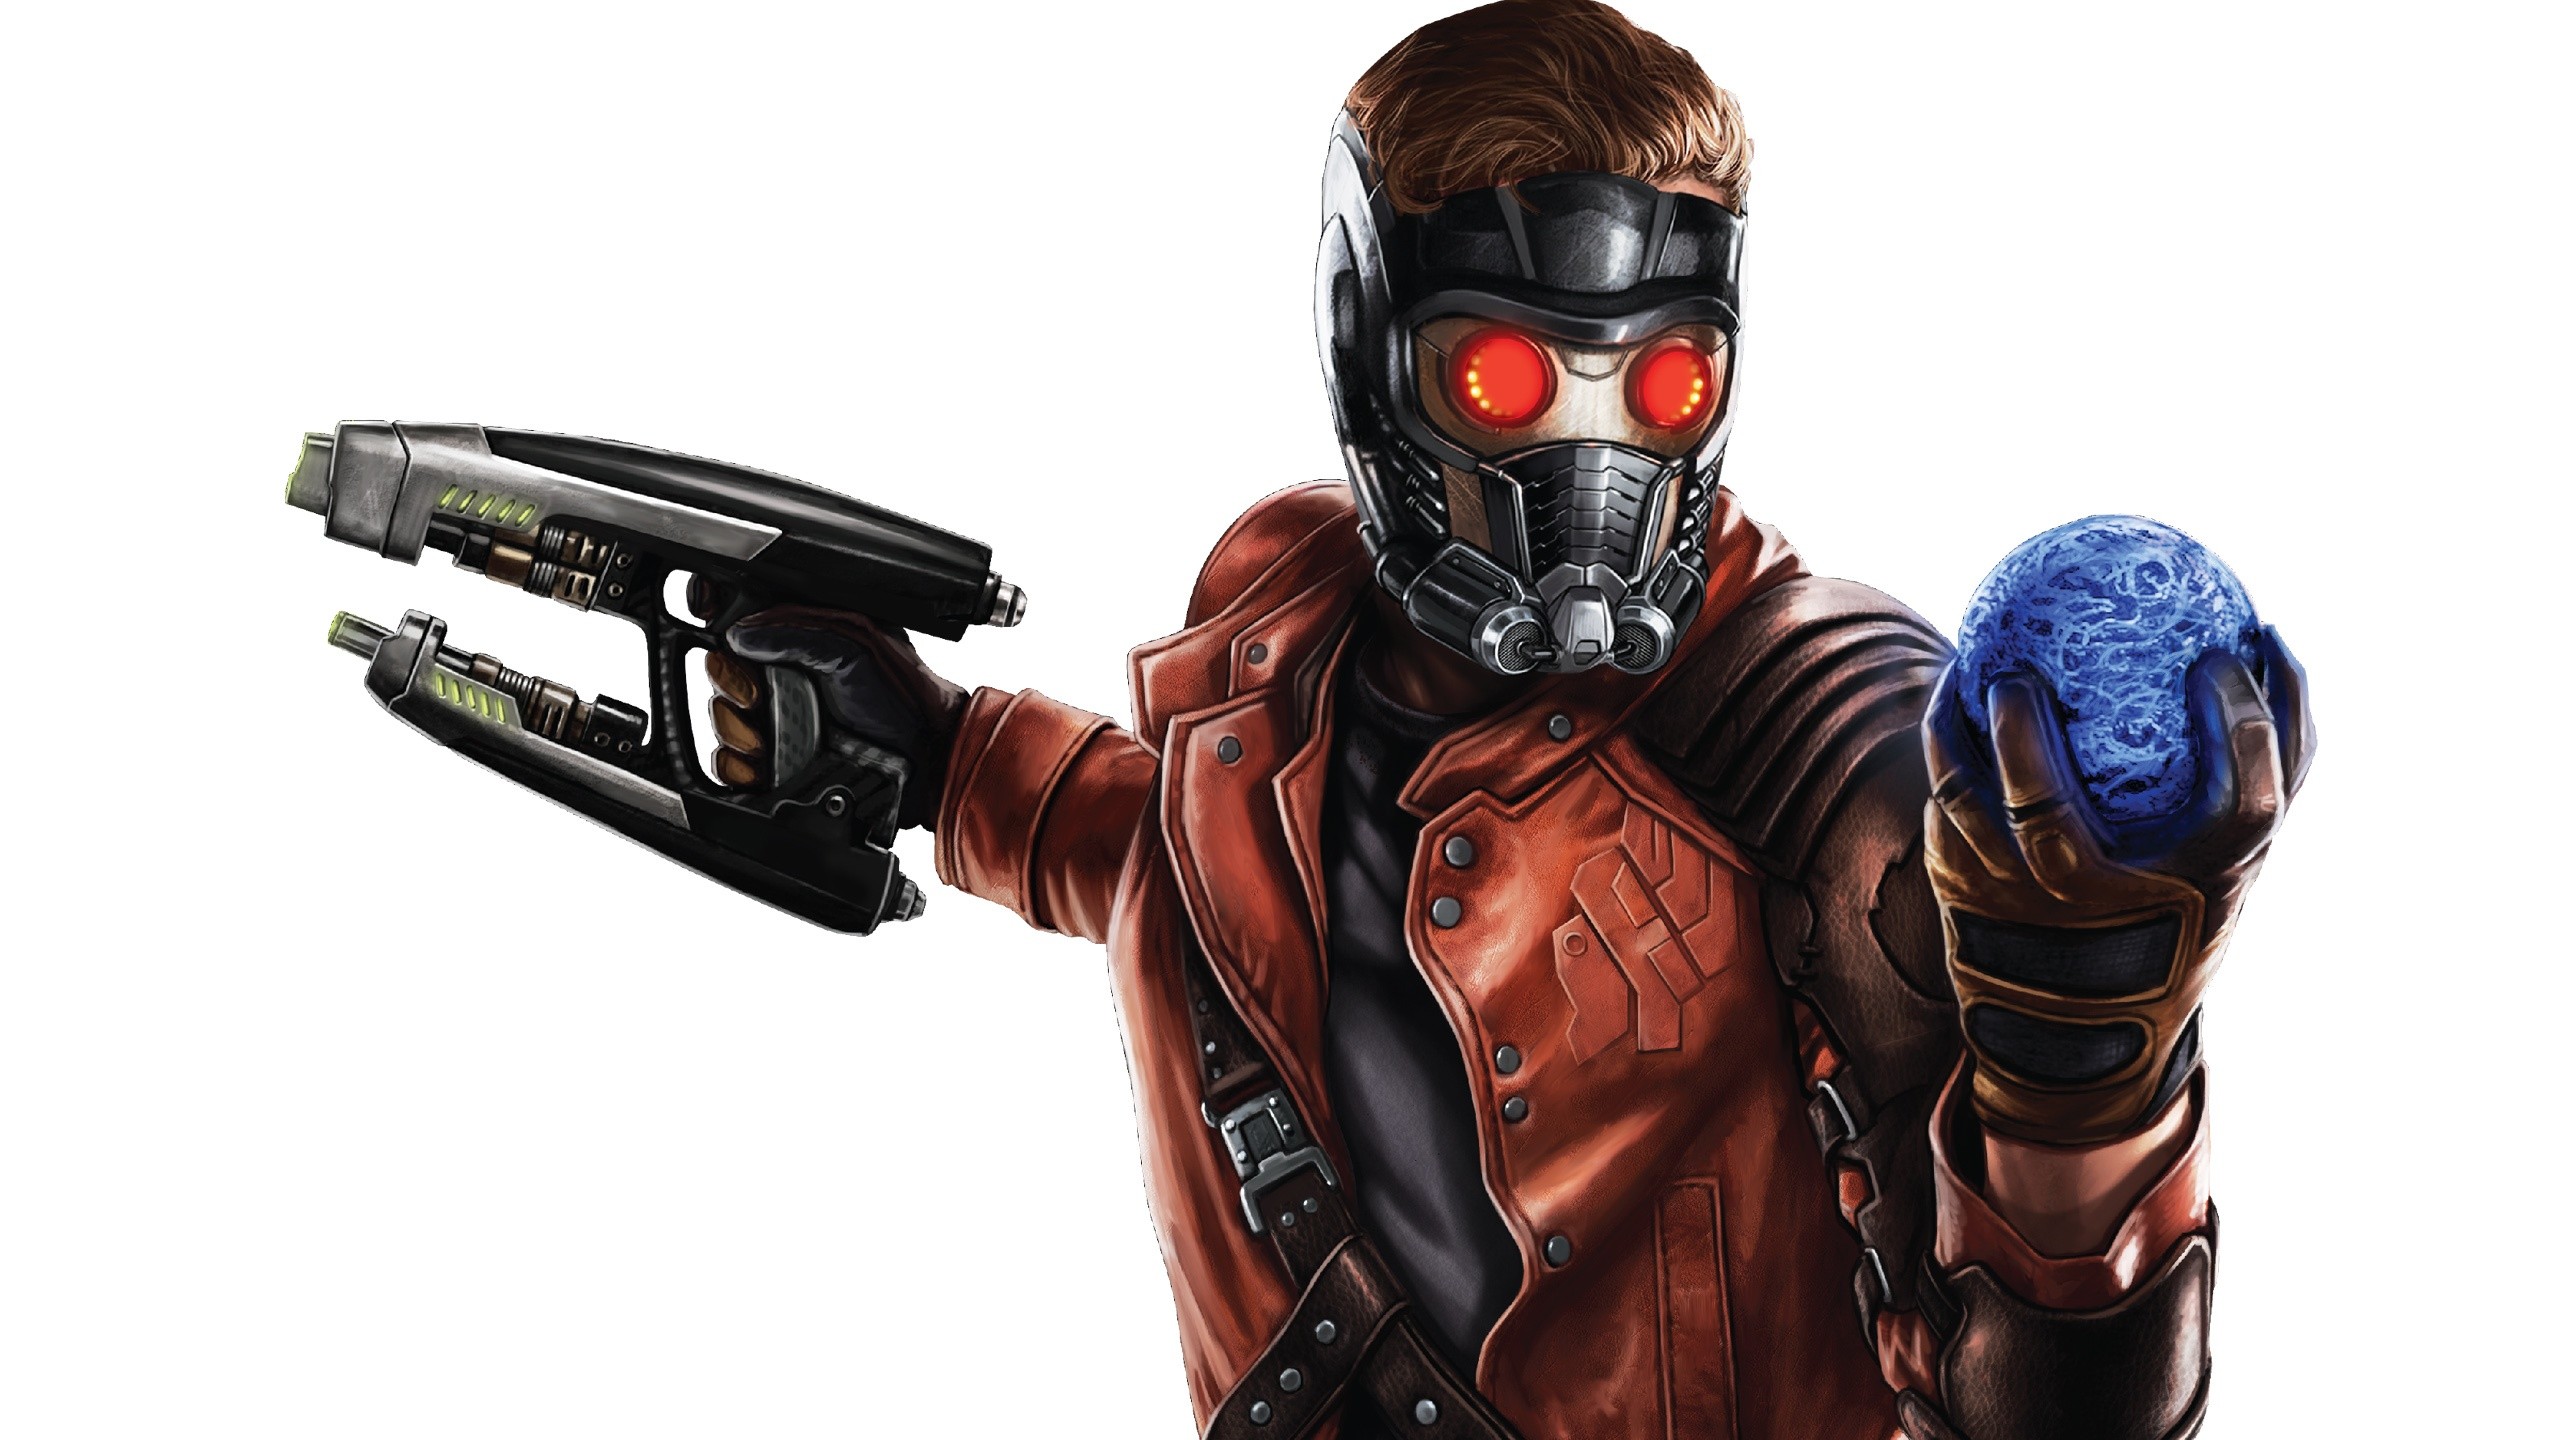 2560x1440 Star Lord | Star Lord in Guardians of the Galaxy wallpaper